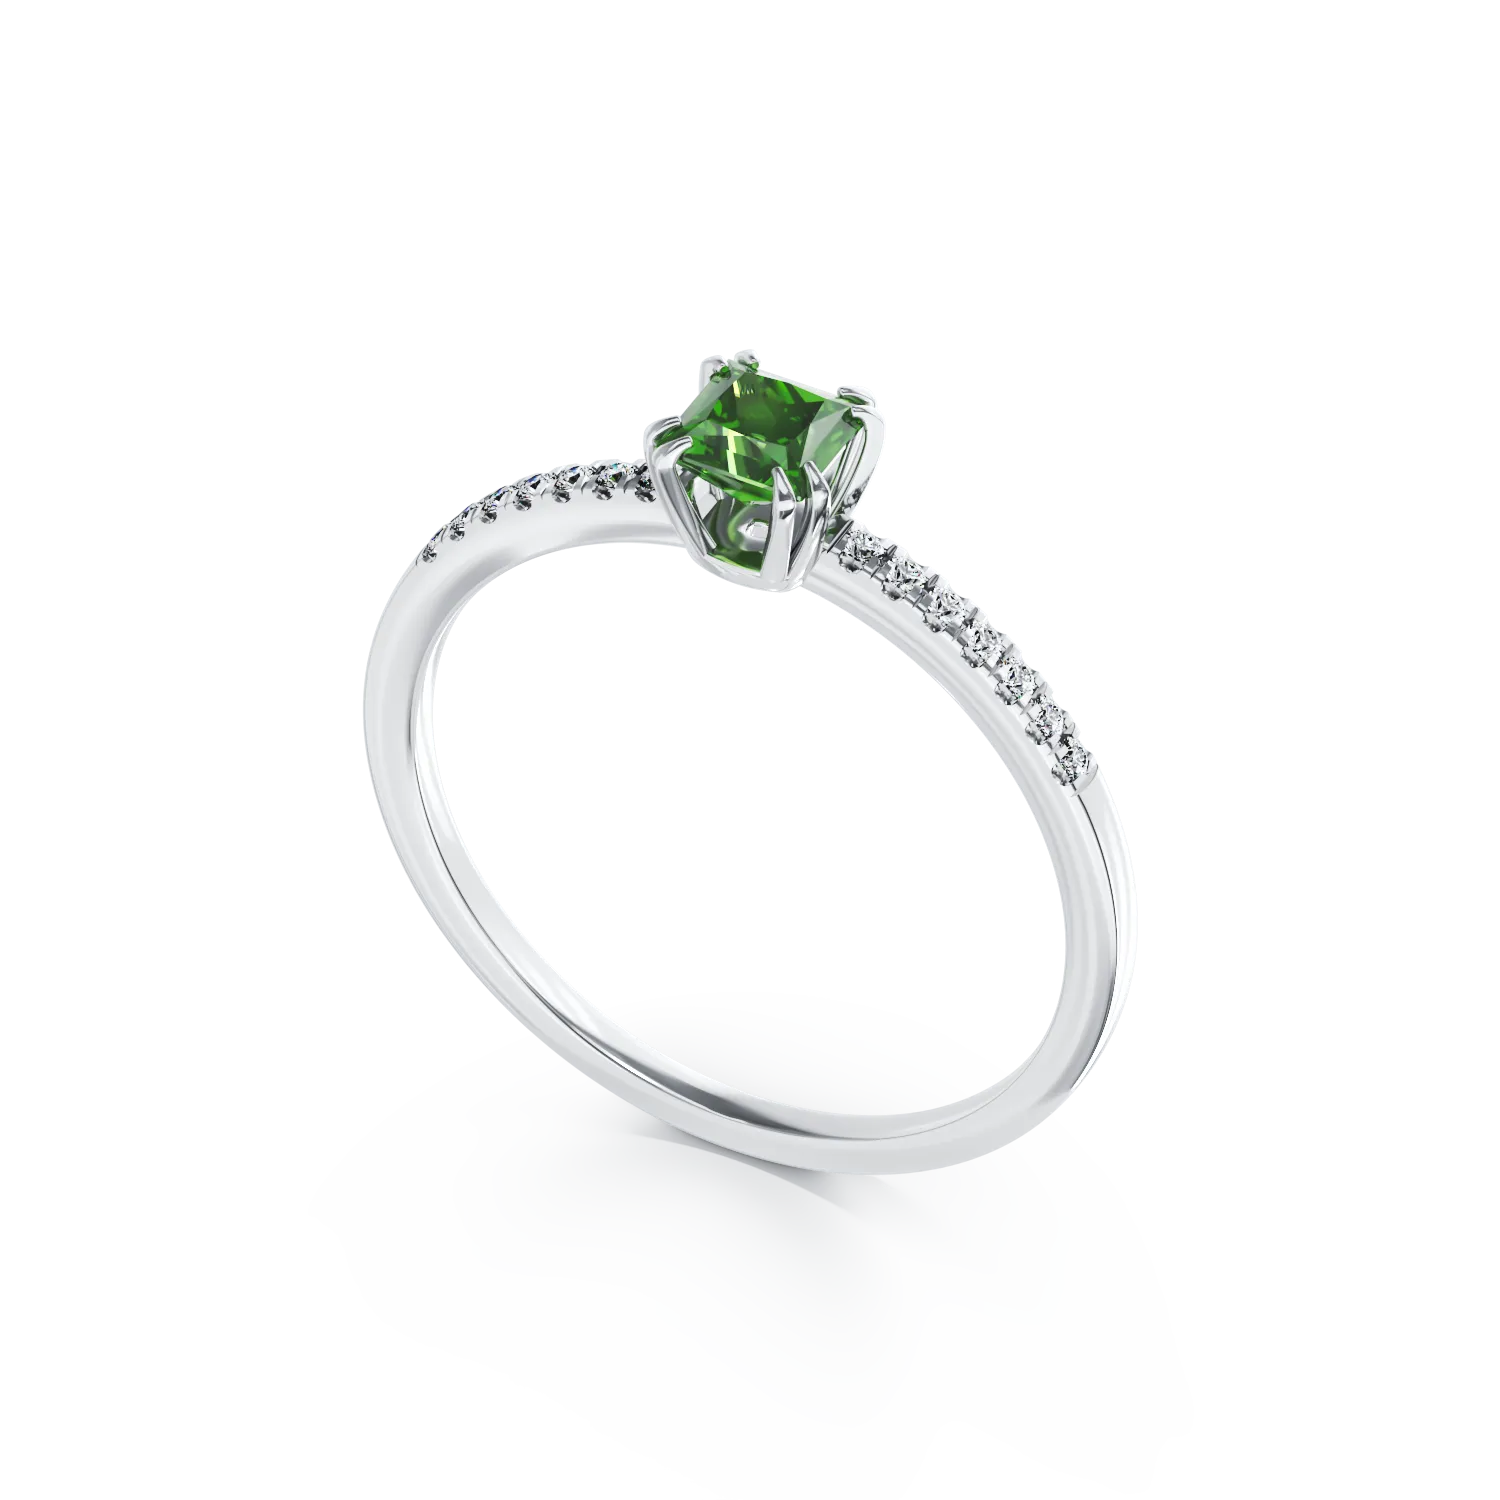 18K white gold engagement ring with 0.42ct chromediopsite and 0.05ct diamonds